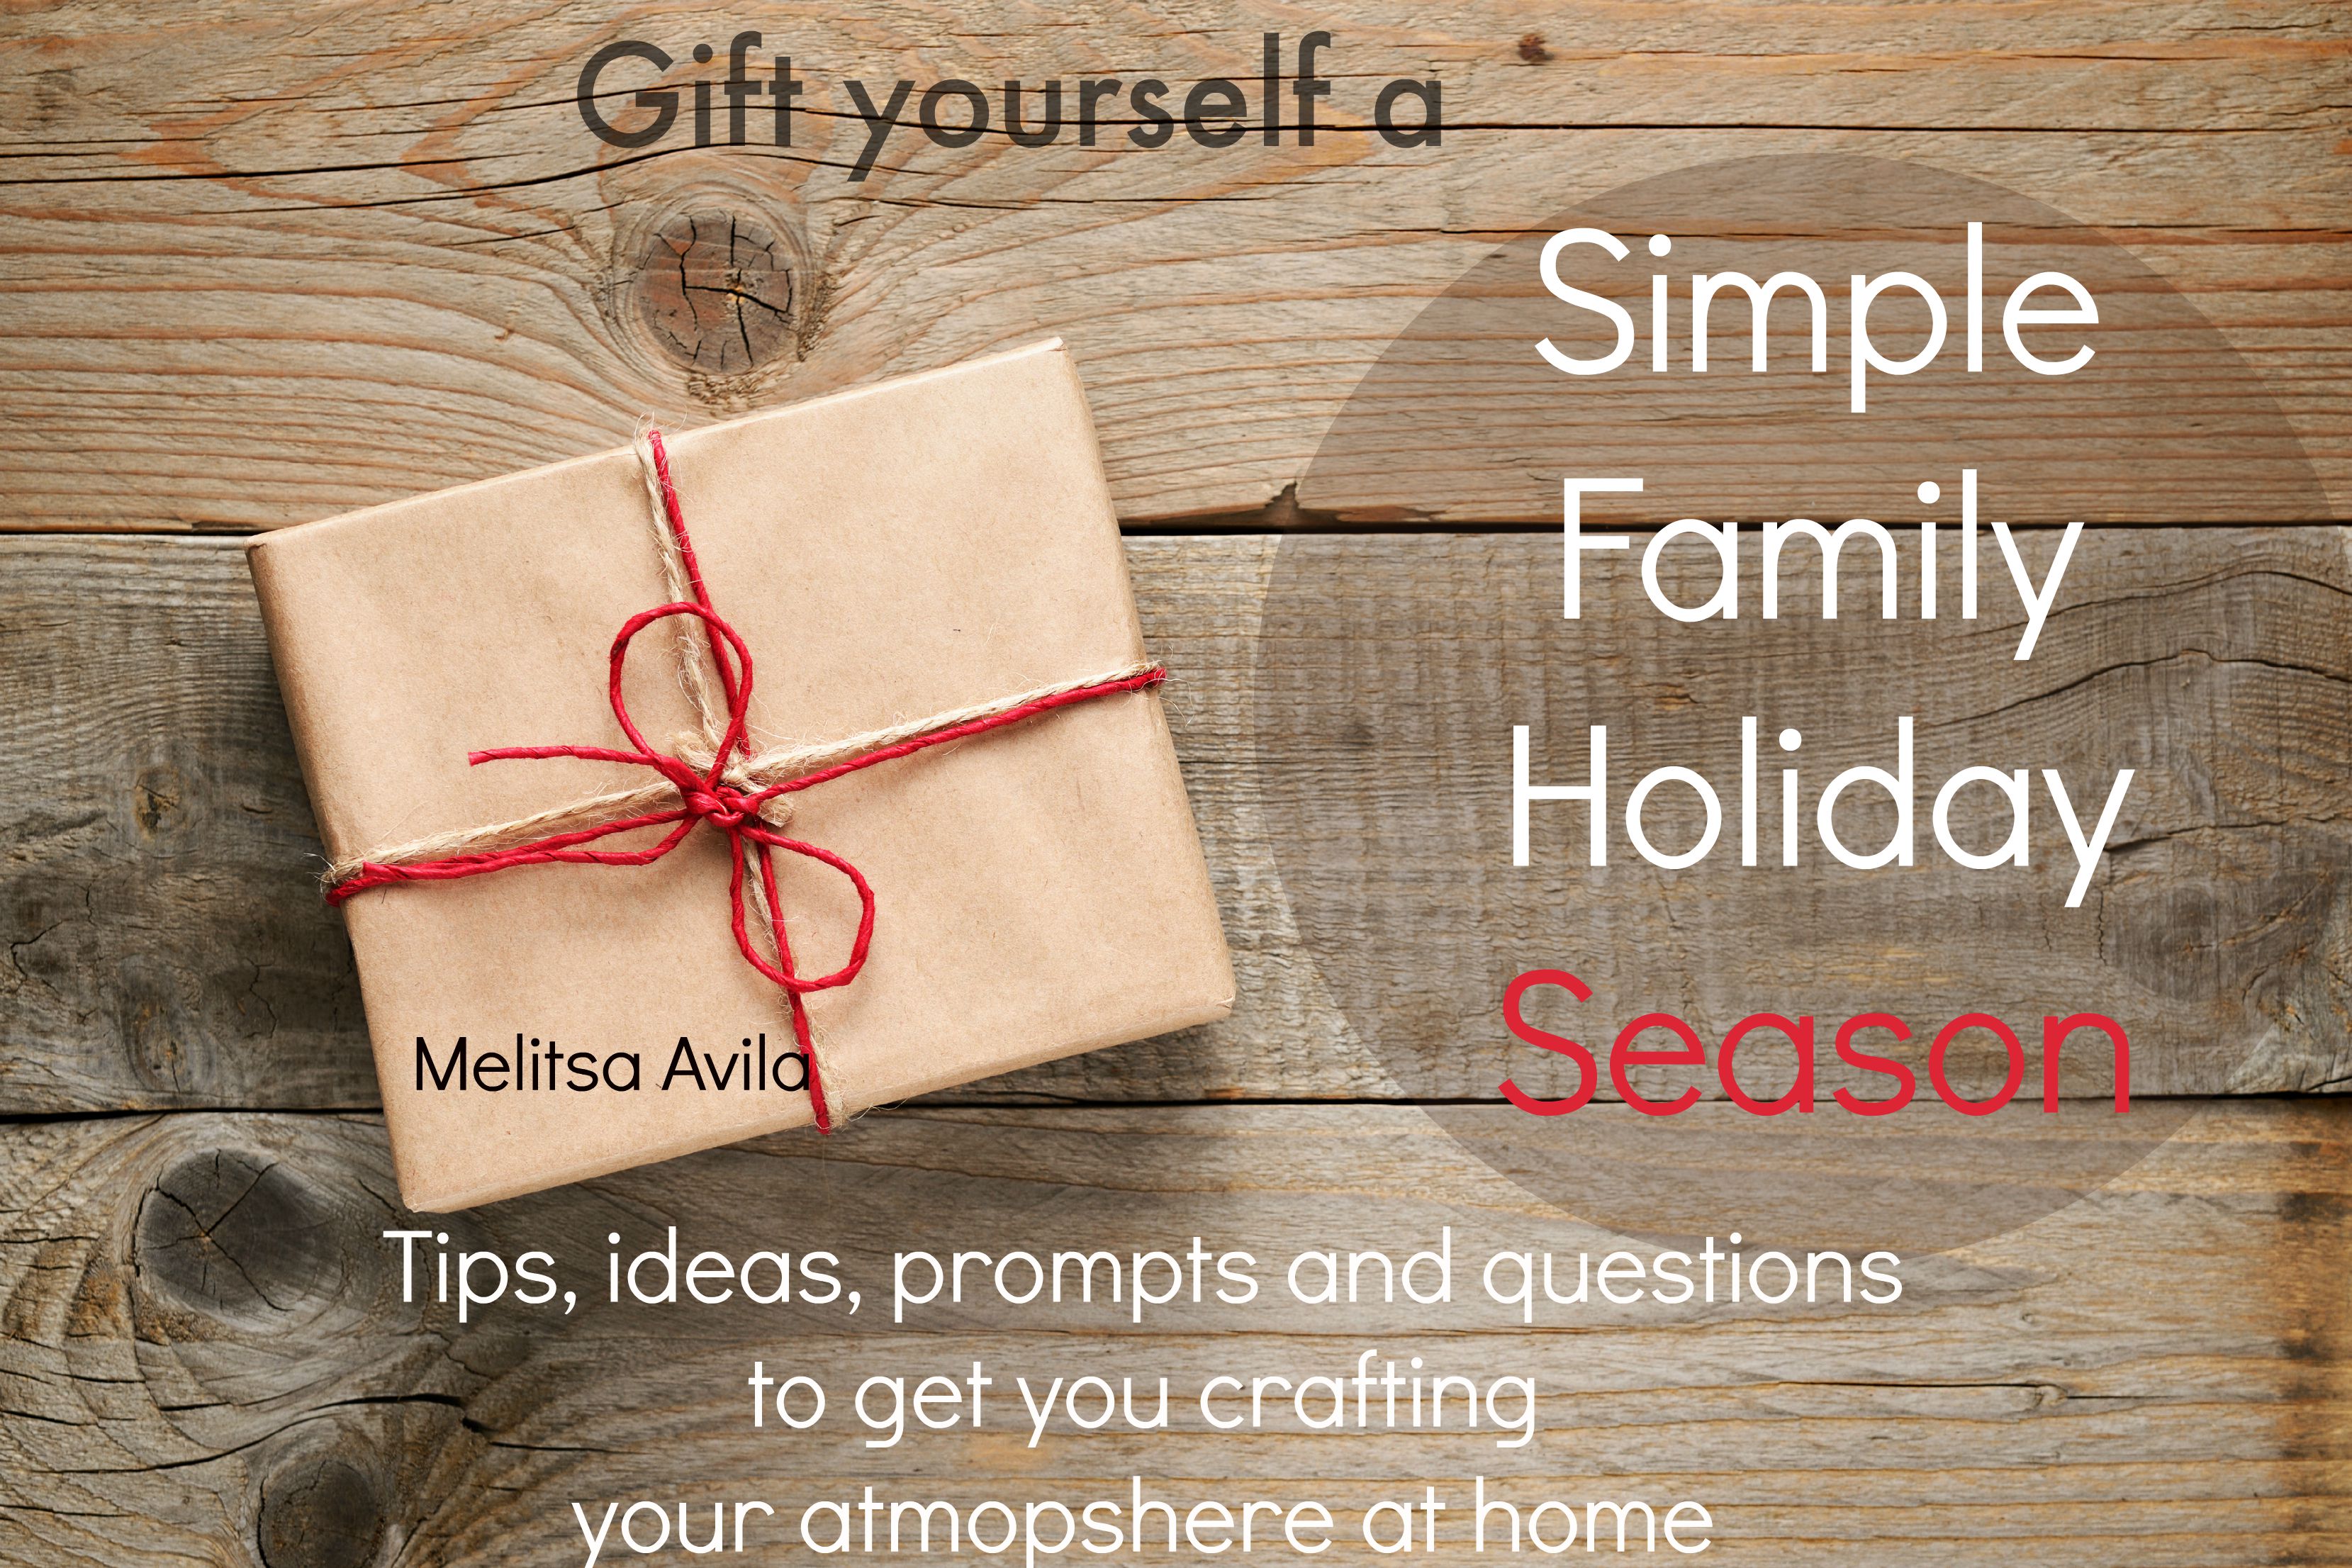 Set the stage for your simple family holiday season with these tips, prompts and discussions that bring comfy and cozy to your family home